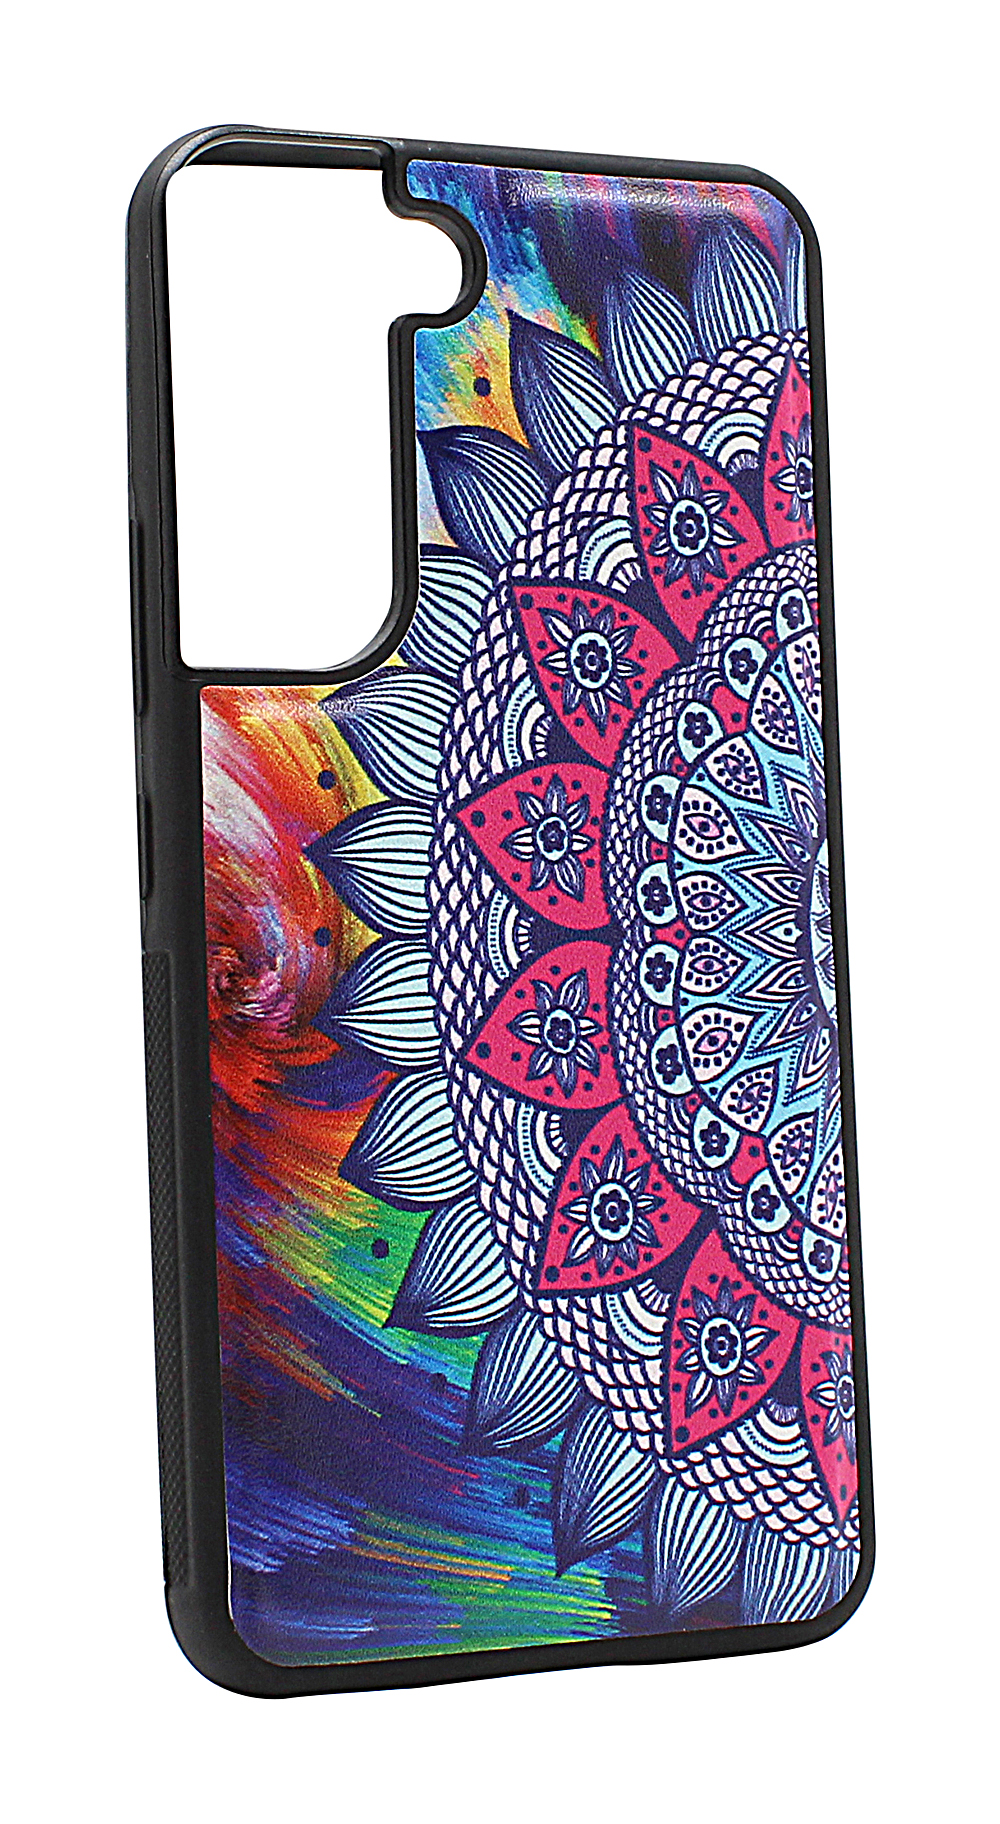 Magnet Cover Samsung Galaxy S22 5G (S901B/DS)